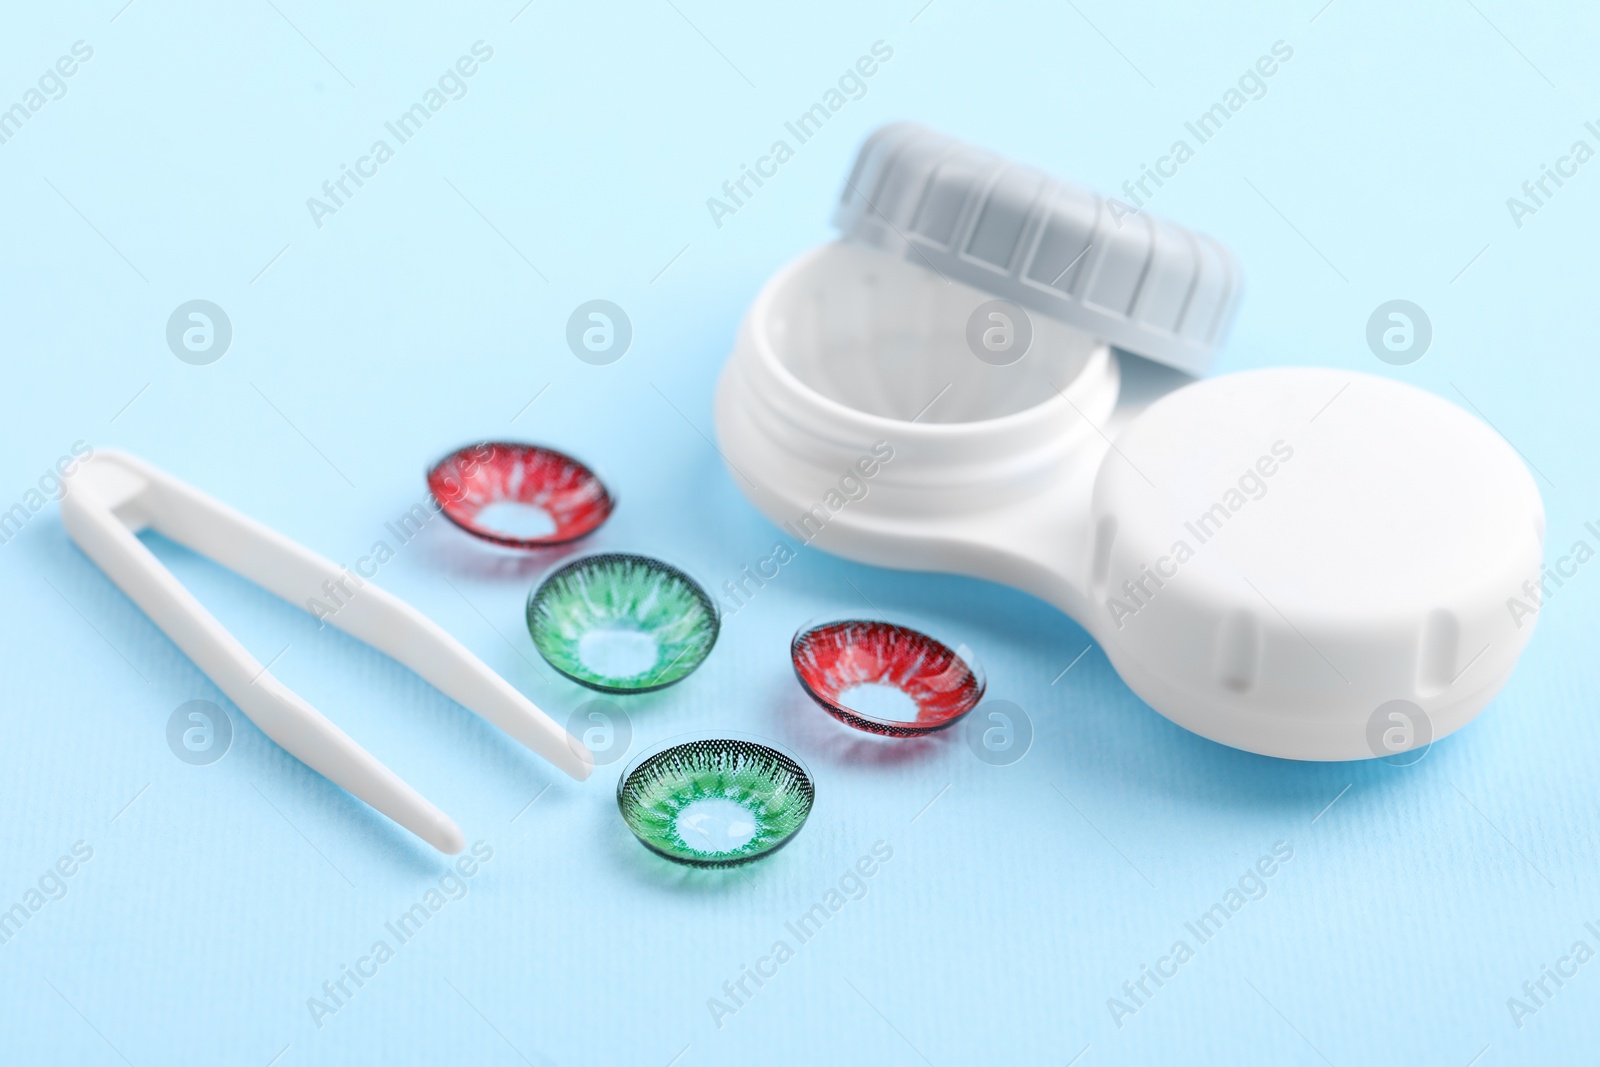 Photo of Different color contact lenses, case and tweezers on light blue background